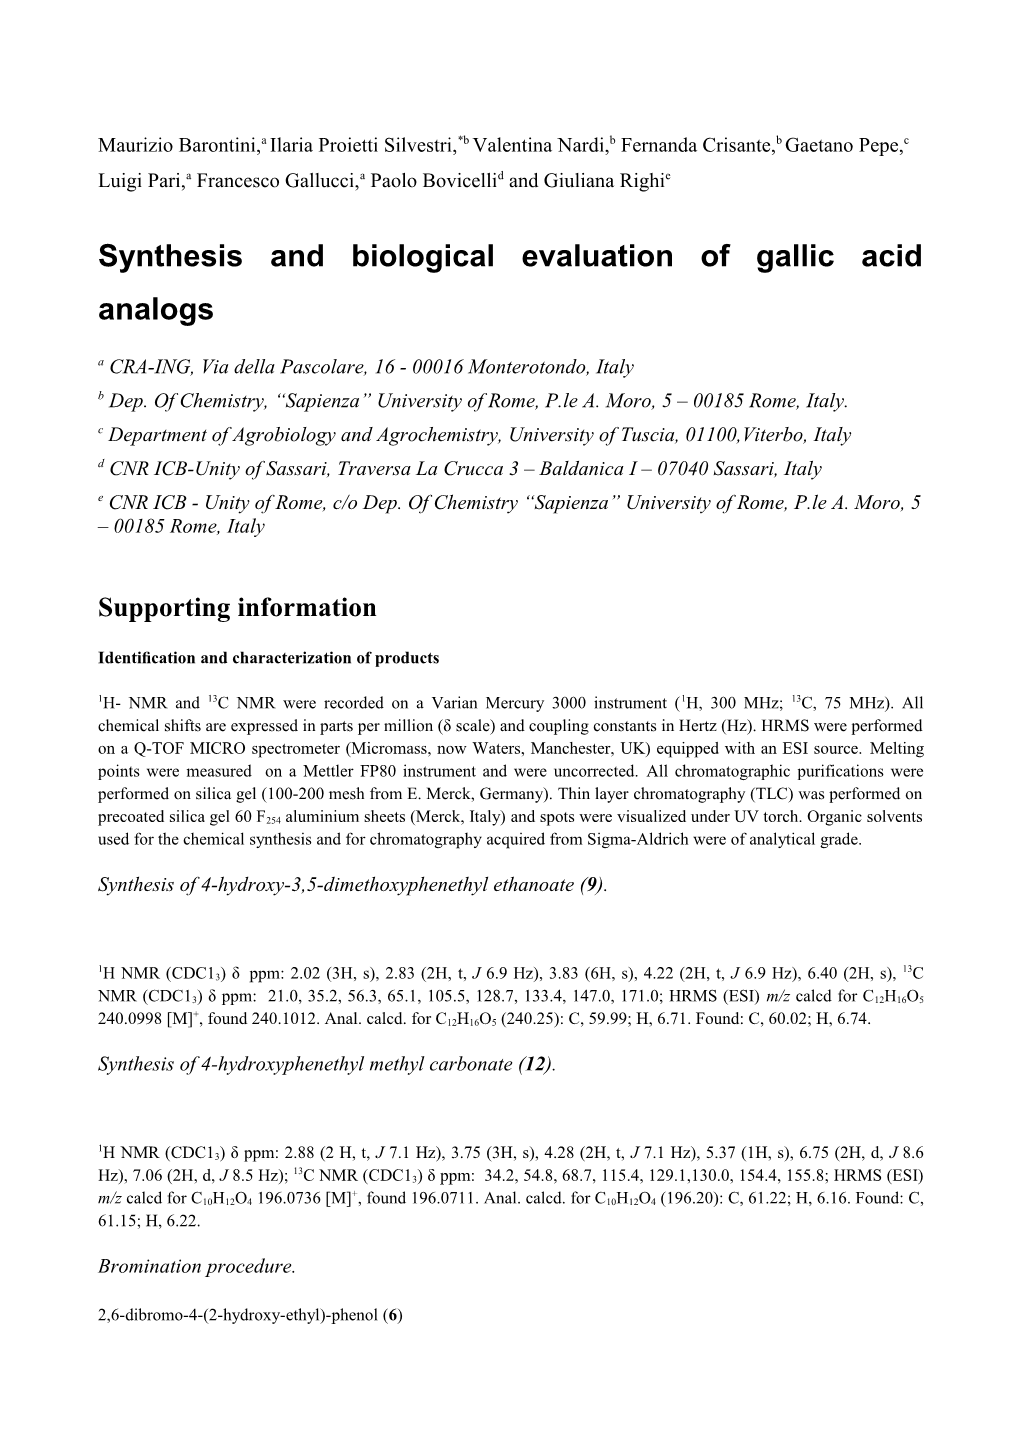 Synthesis and Biological Evaluation of Gallic Acid Analogs